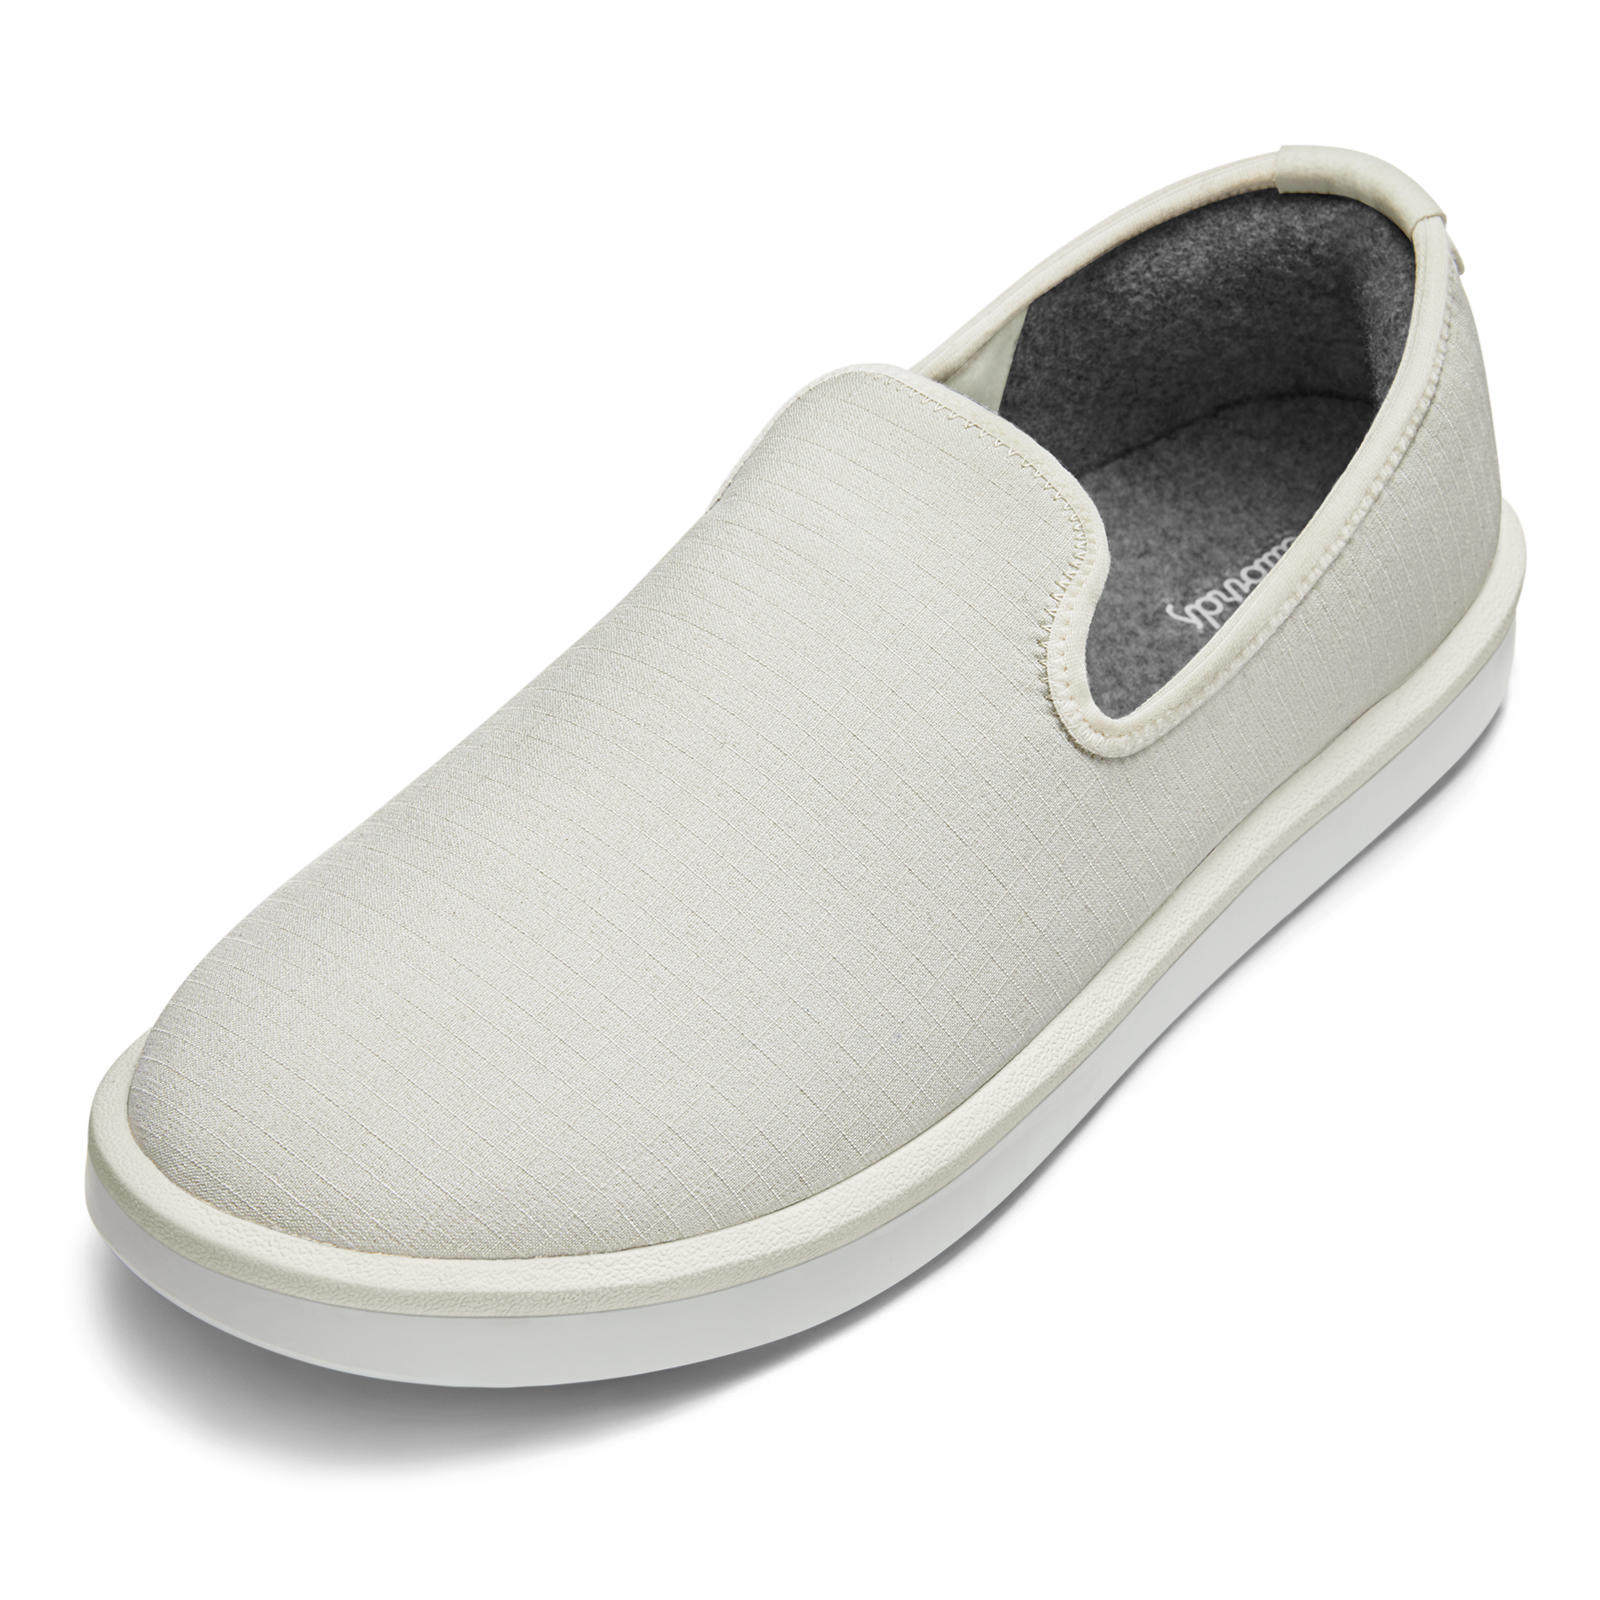 Women's Wool Lounger Woven - Natural White (Blizzard Sole)